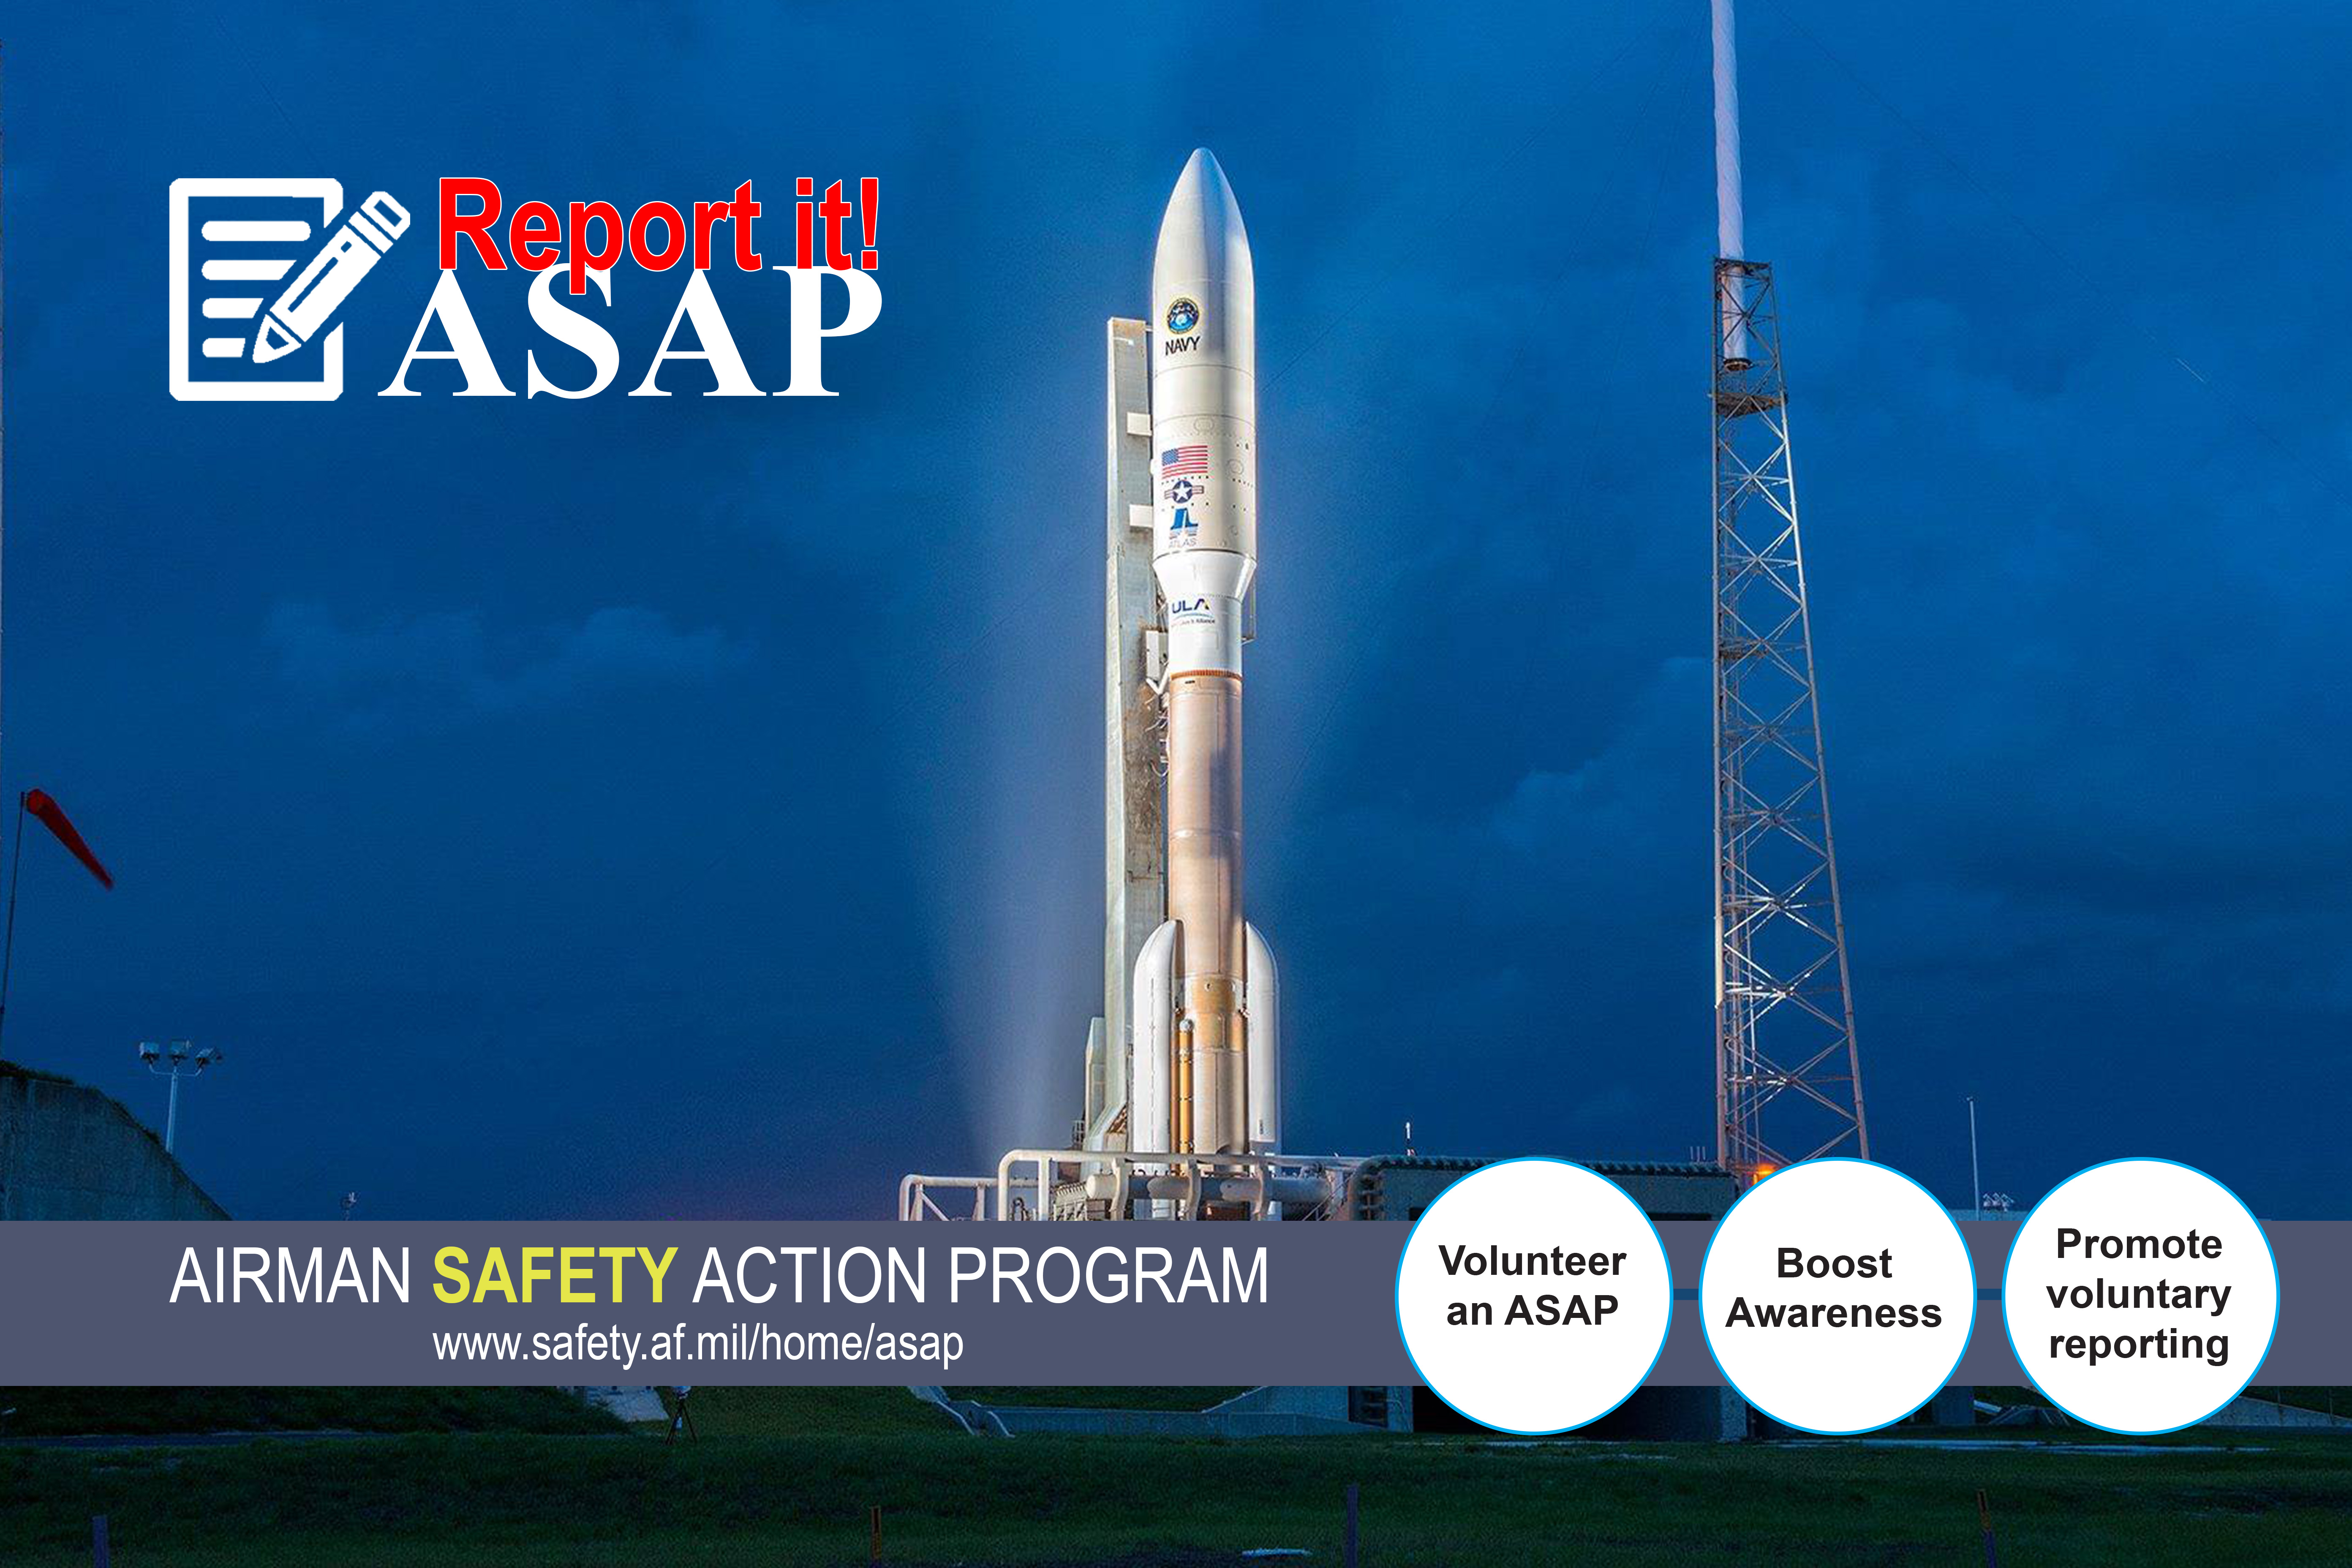 Link to Airman Safety Action Program space poster